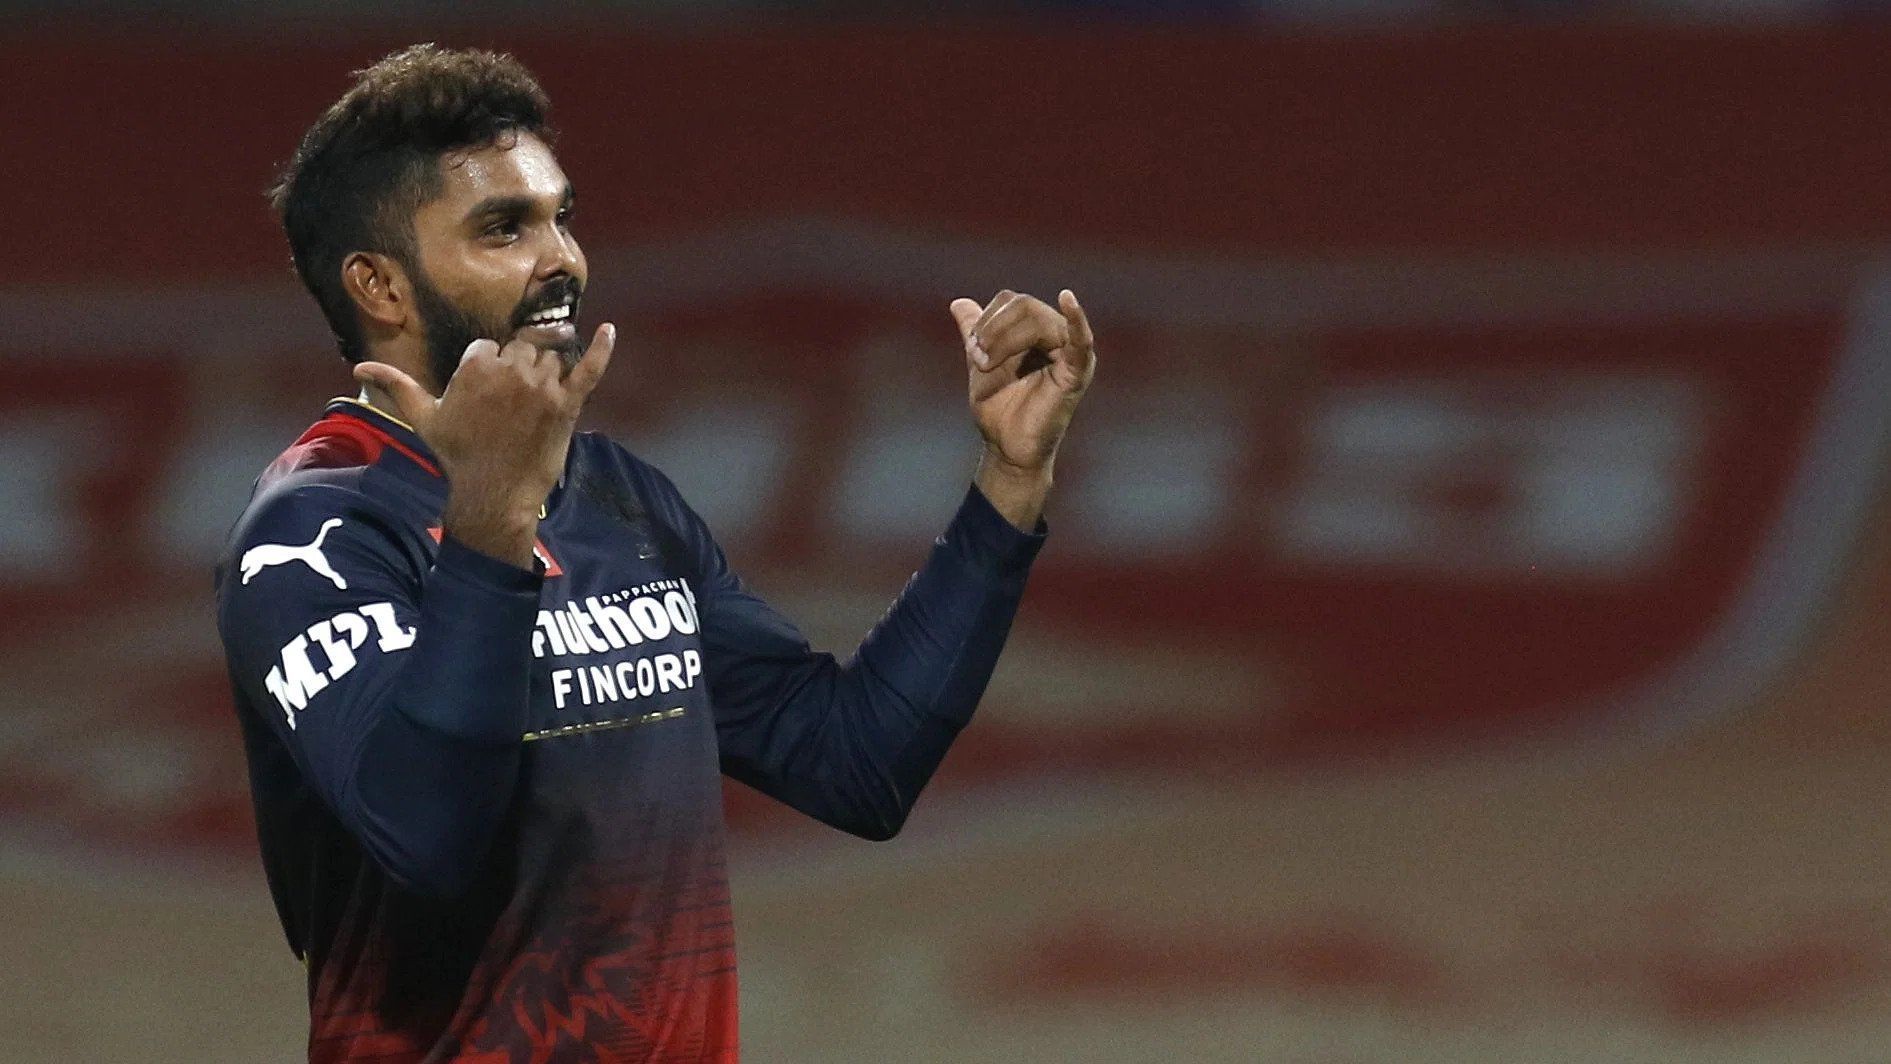 Hasaranga has claimed 21 wickets in 12 matches in IPL 2022 so far